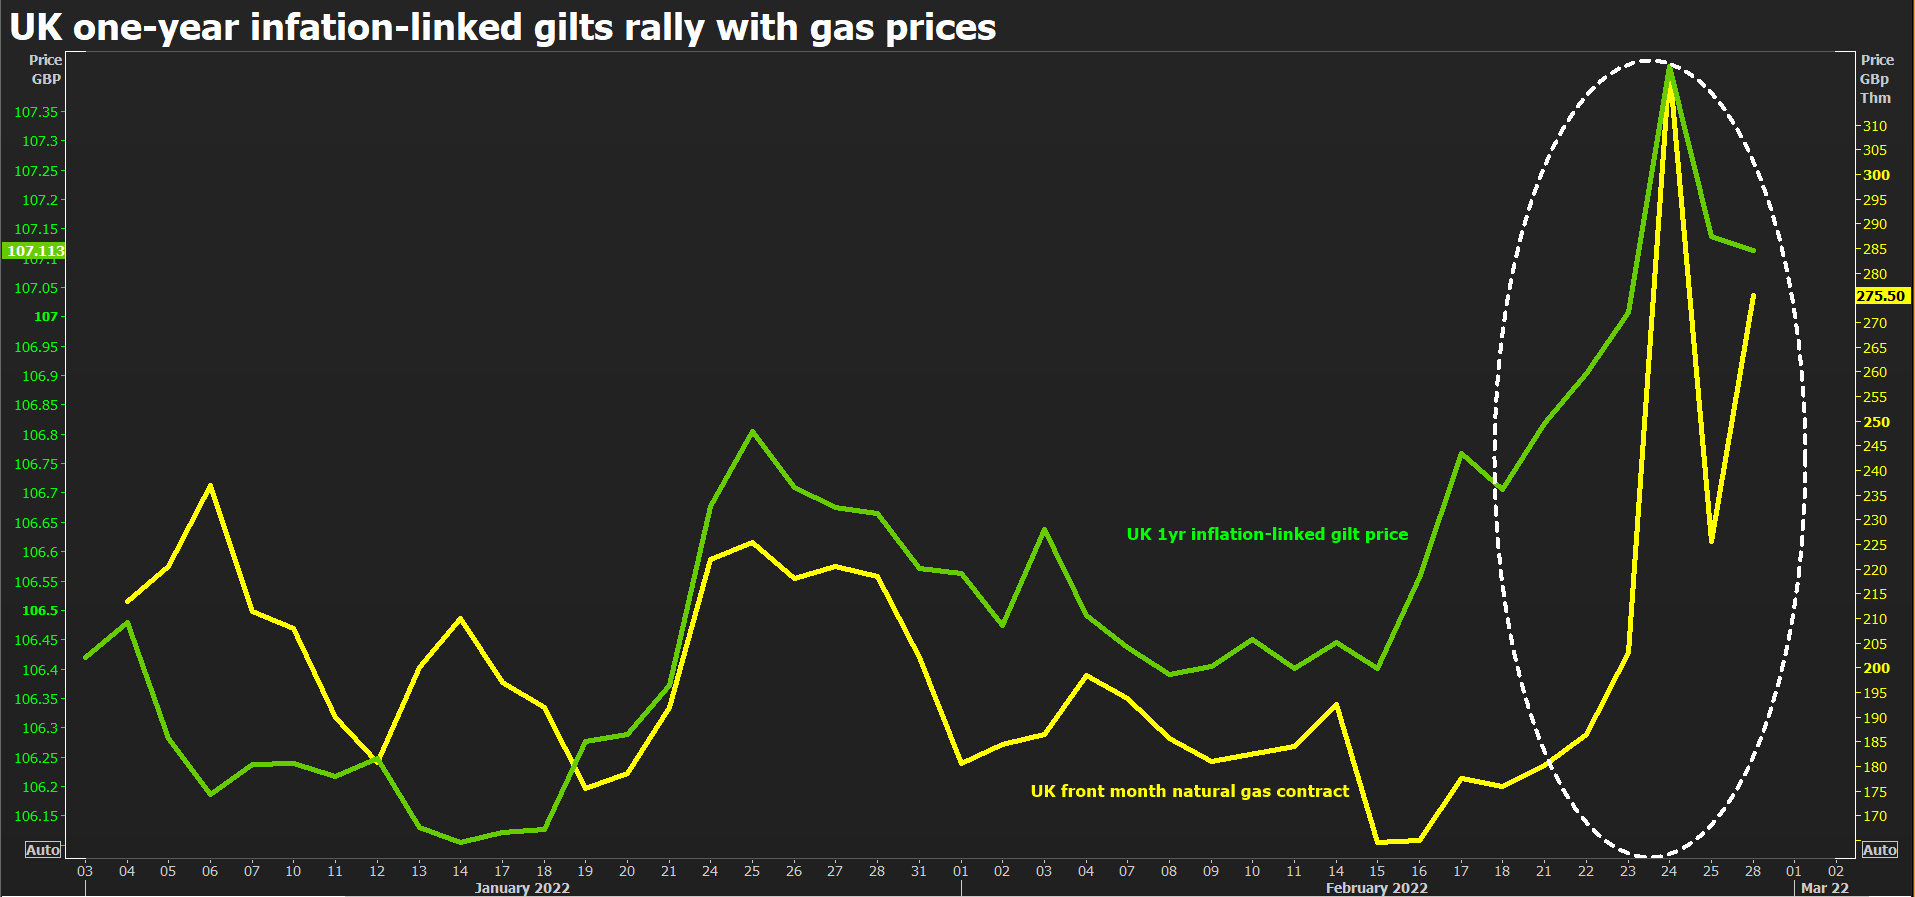 UK inflation-linked gilt and gas price